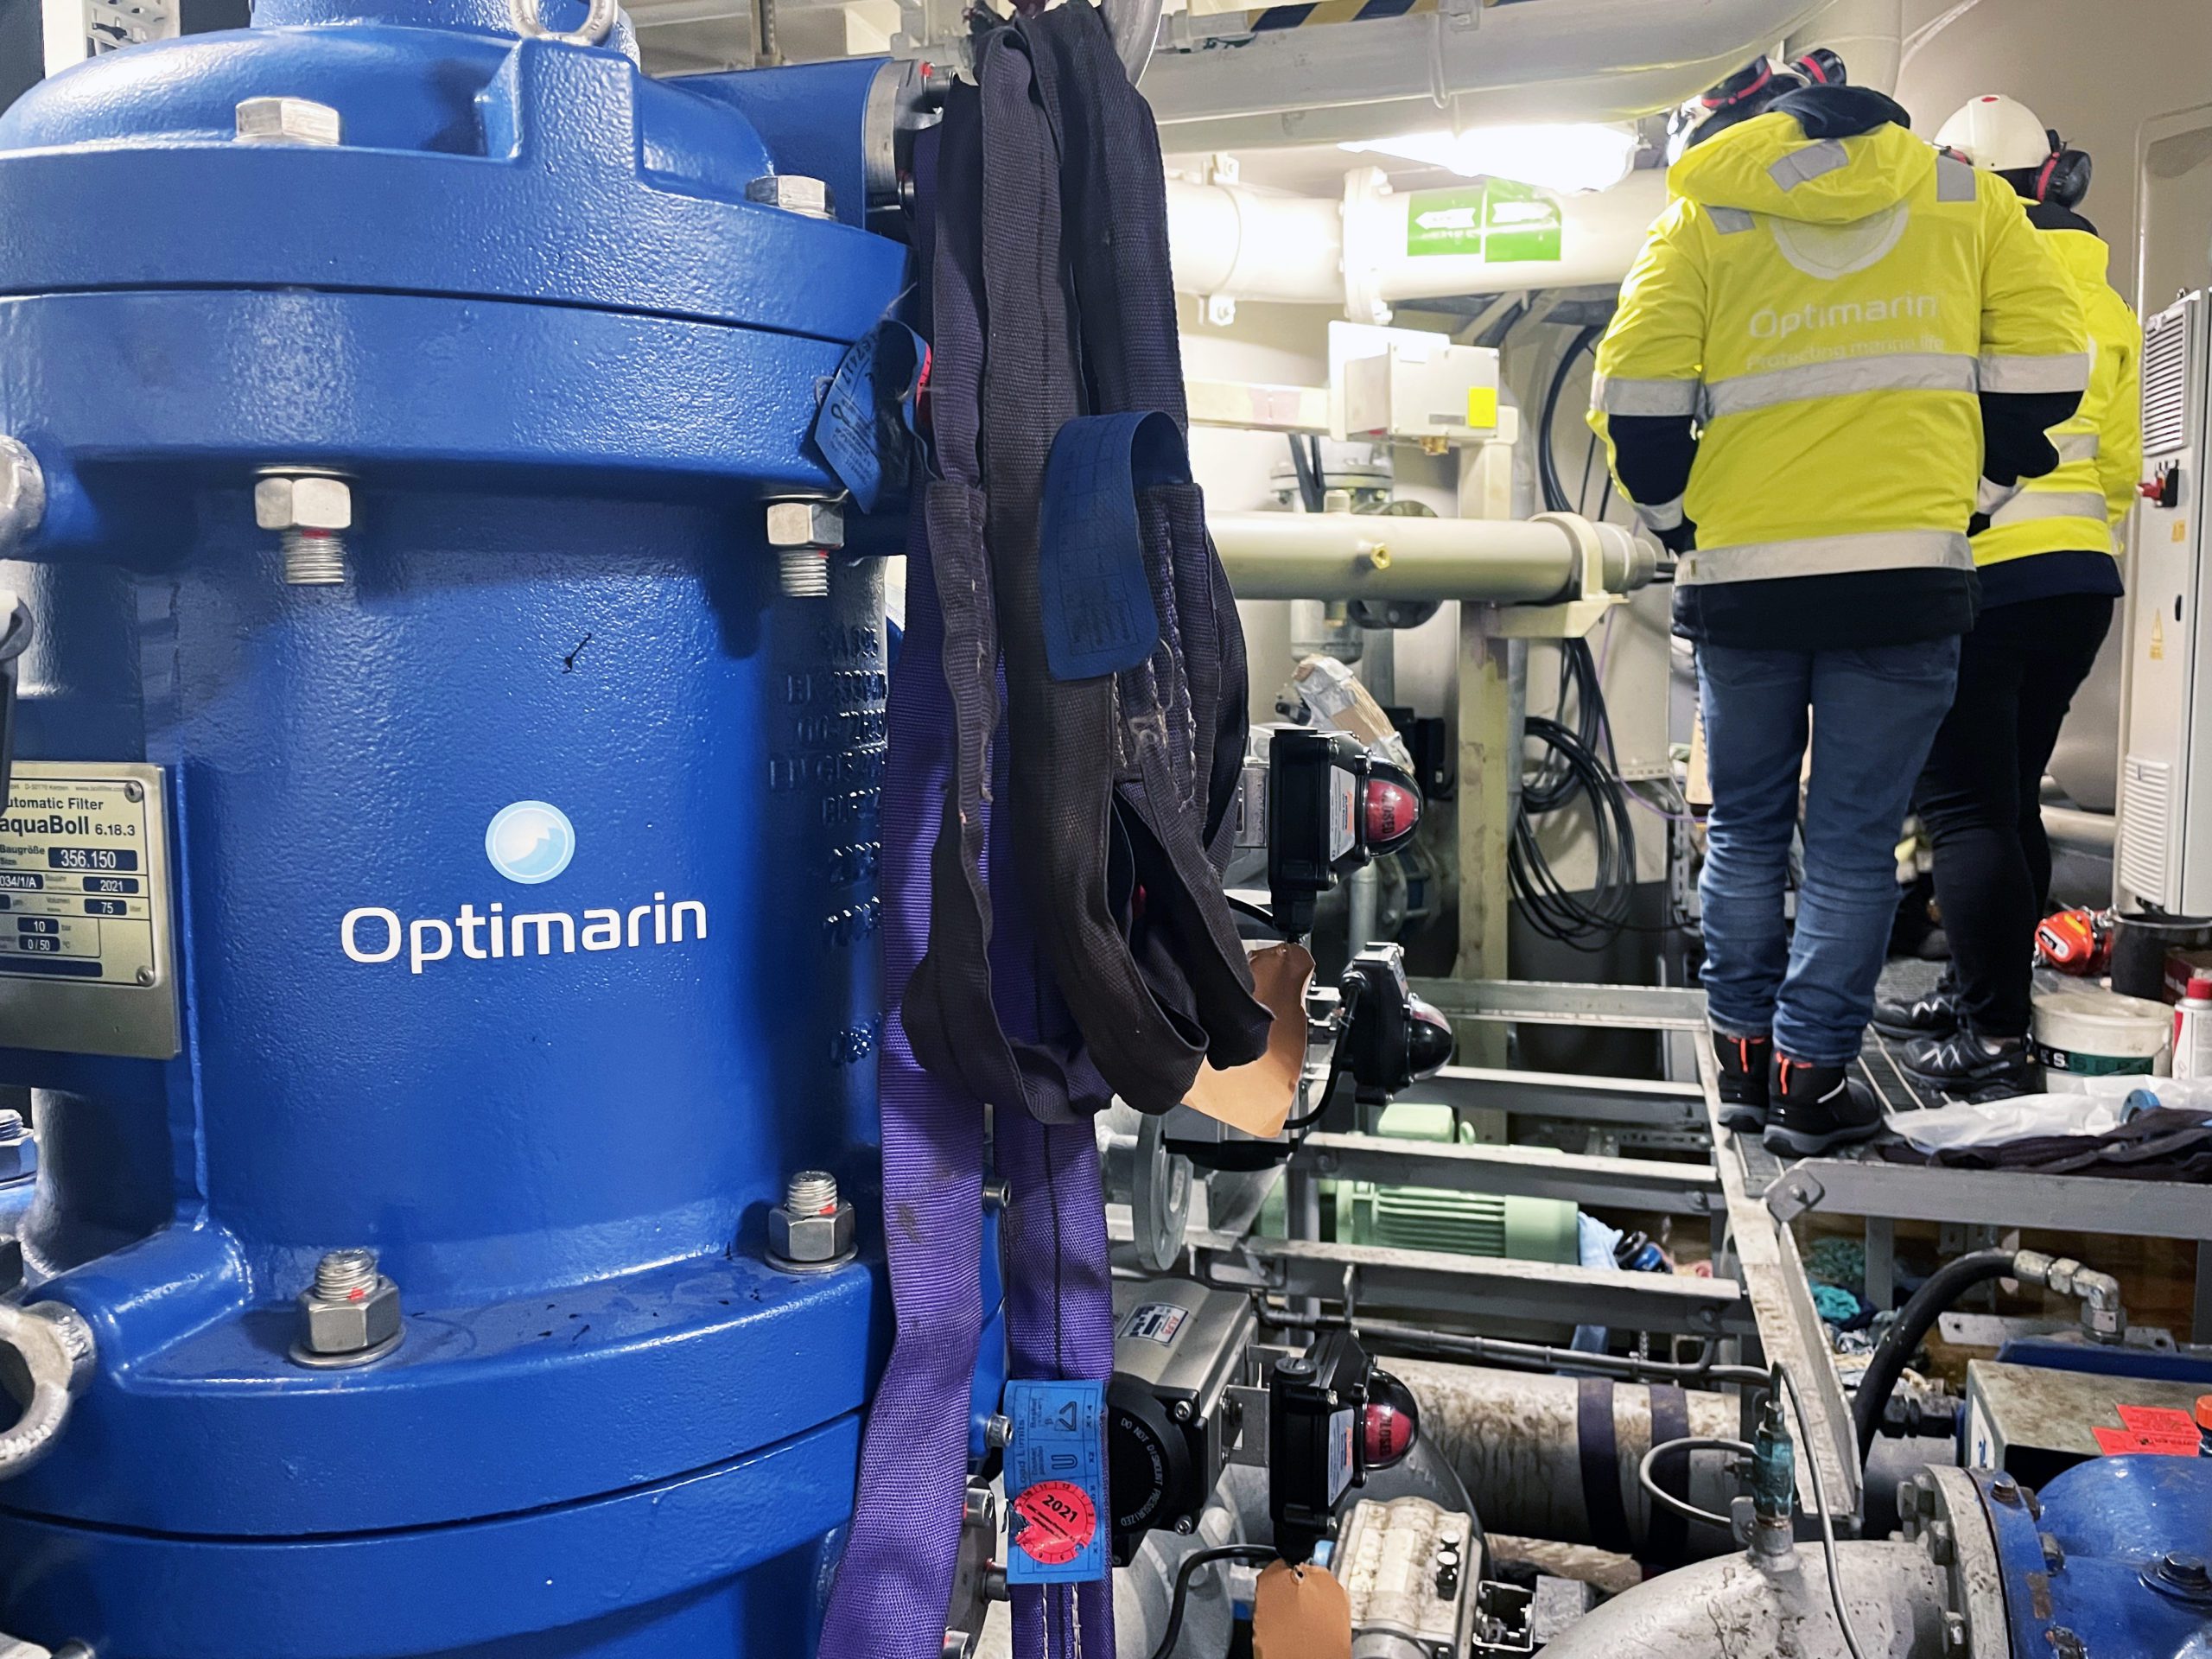 Optimarin achieves record revenue in 2021 on rising BWTS sales